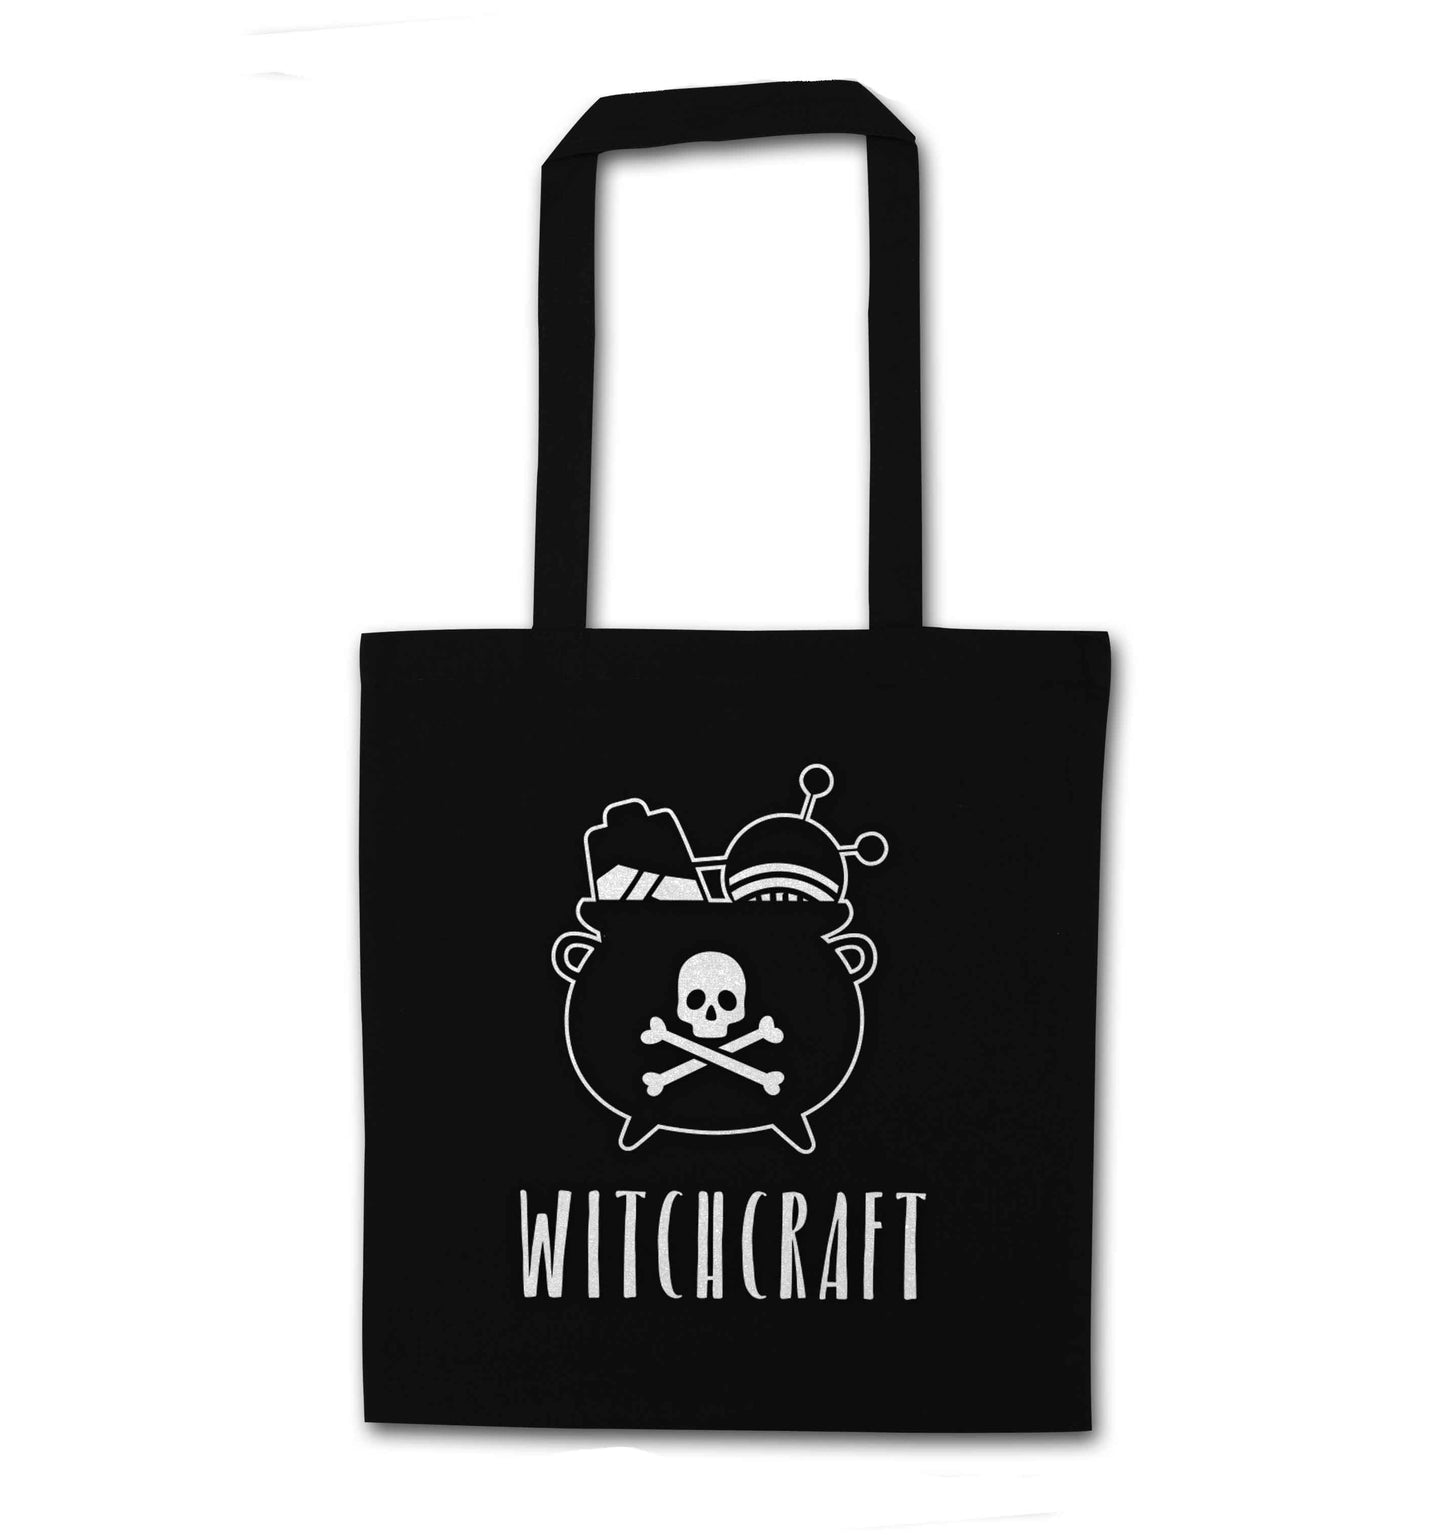 Witchcraft black tote bag